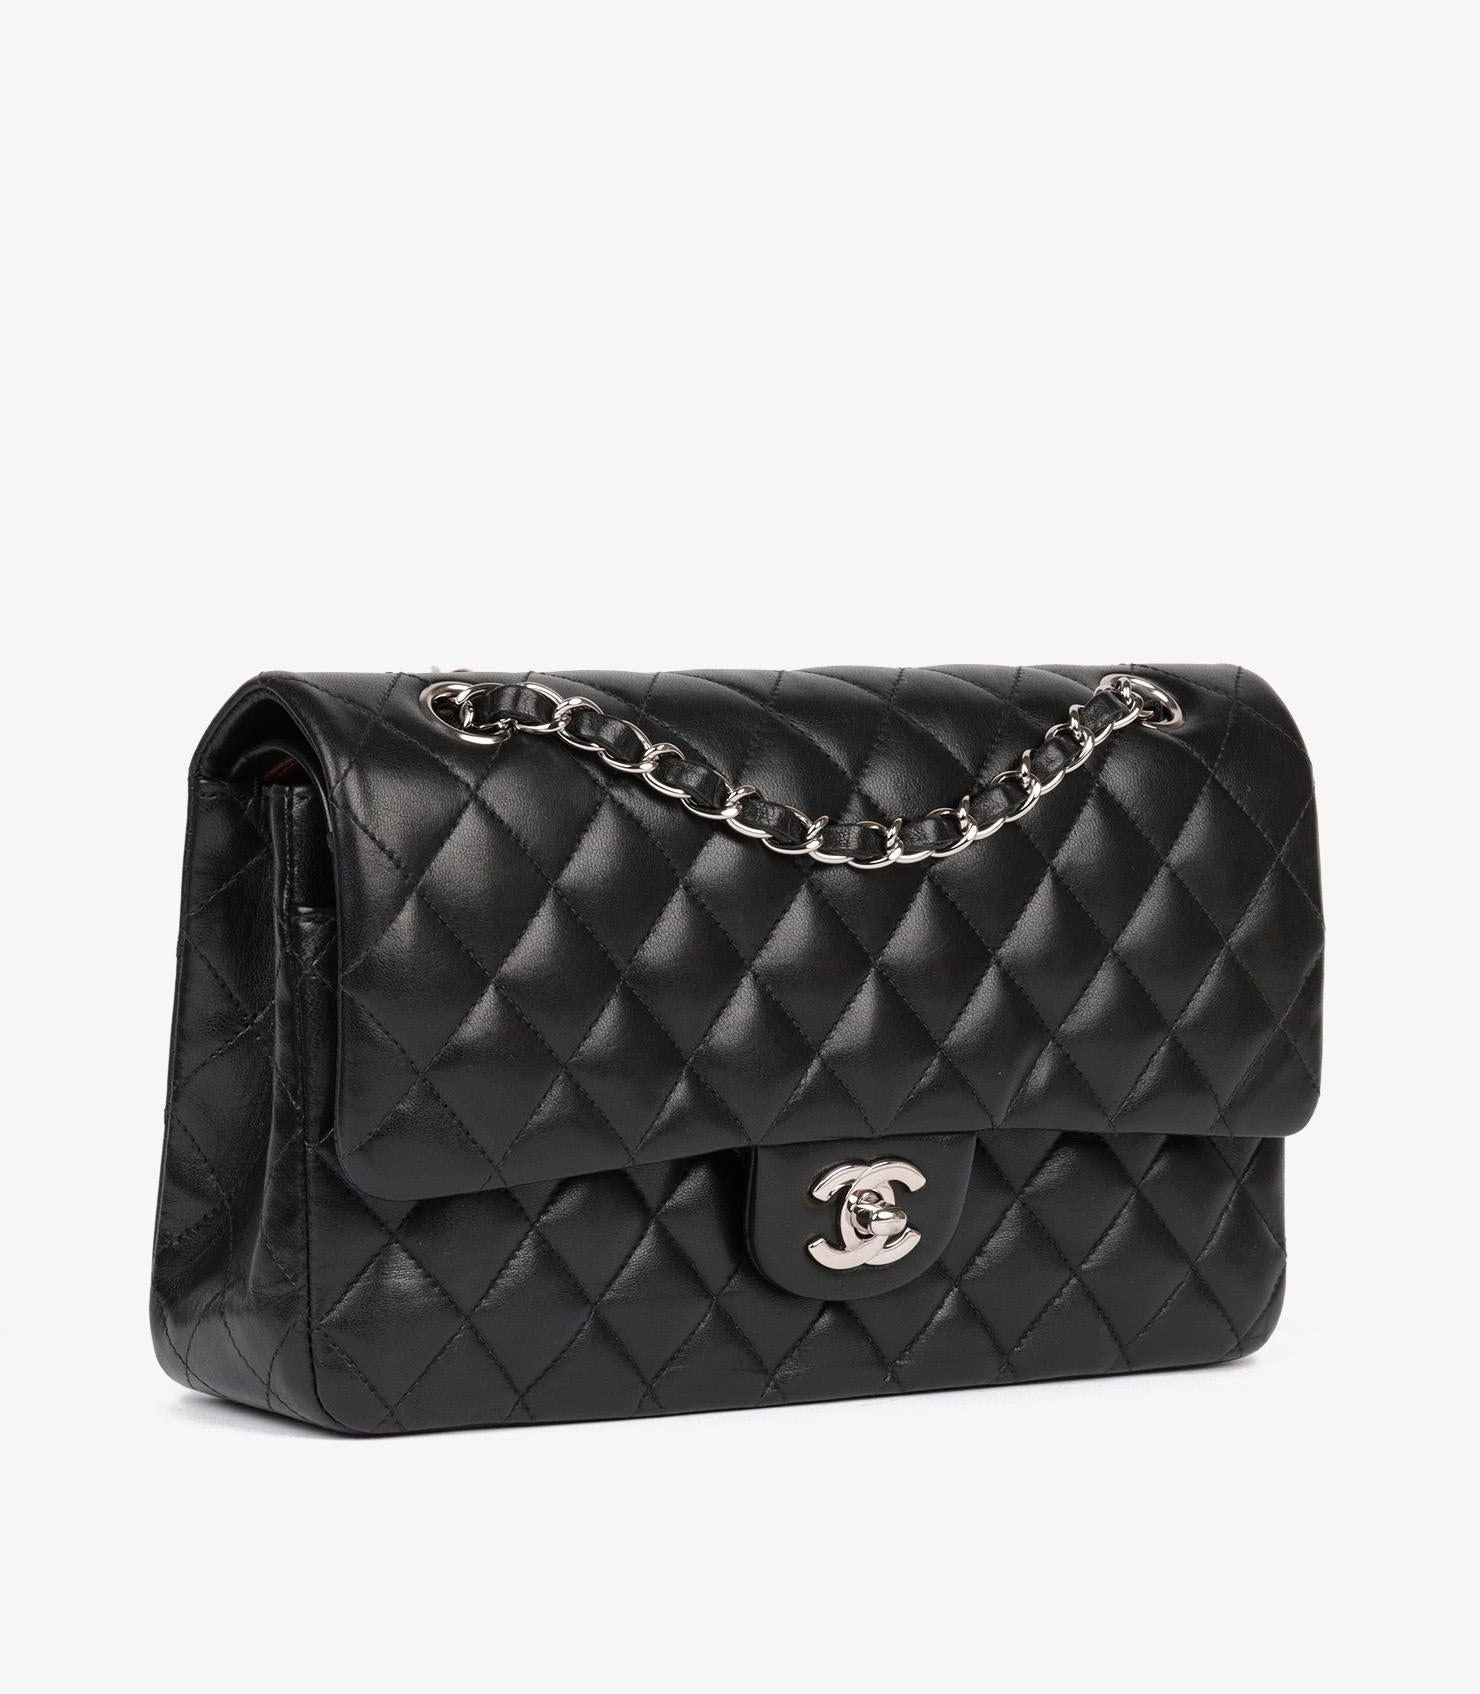 Chanel Black Quilted Lambskin Medium Classic Double Flap Bag

Brand- Chanel
Model- Medium Classic Double Flap Bag
Product Type- Shoulder
Serial Number- 96*****
Age- Circa 2004
Accompanied By- Chanel Dust Bag, Authenticity Card
Colour-